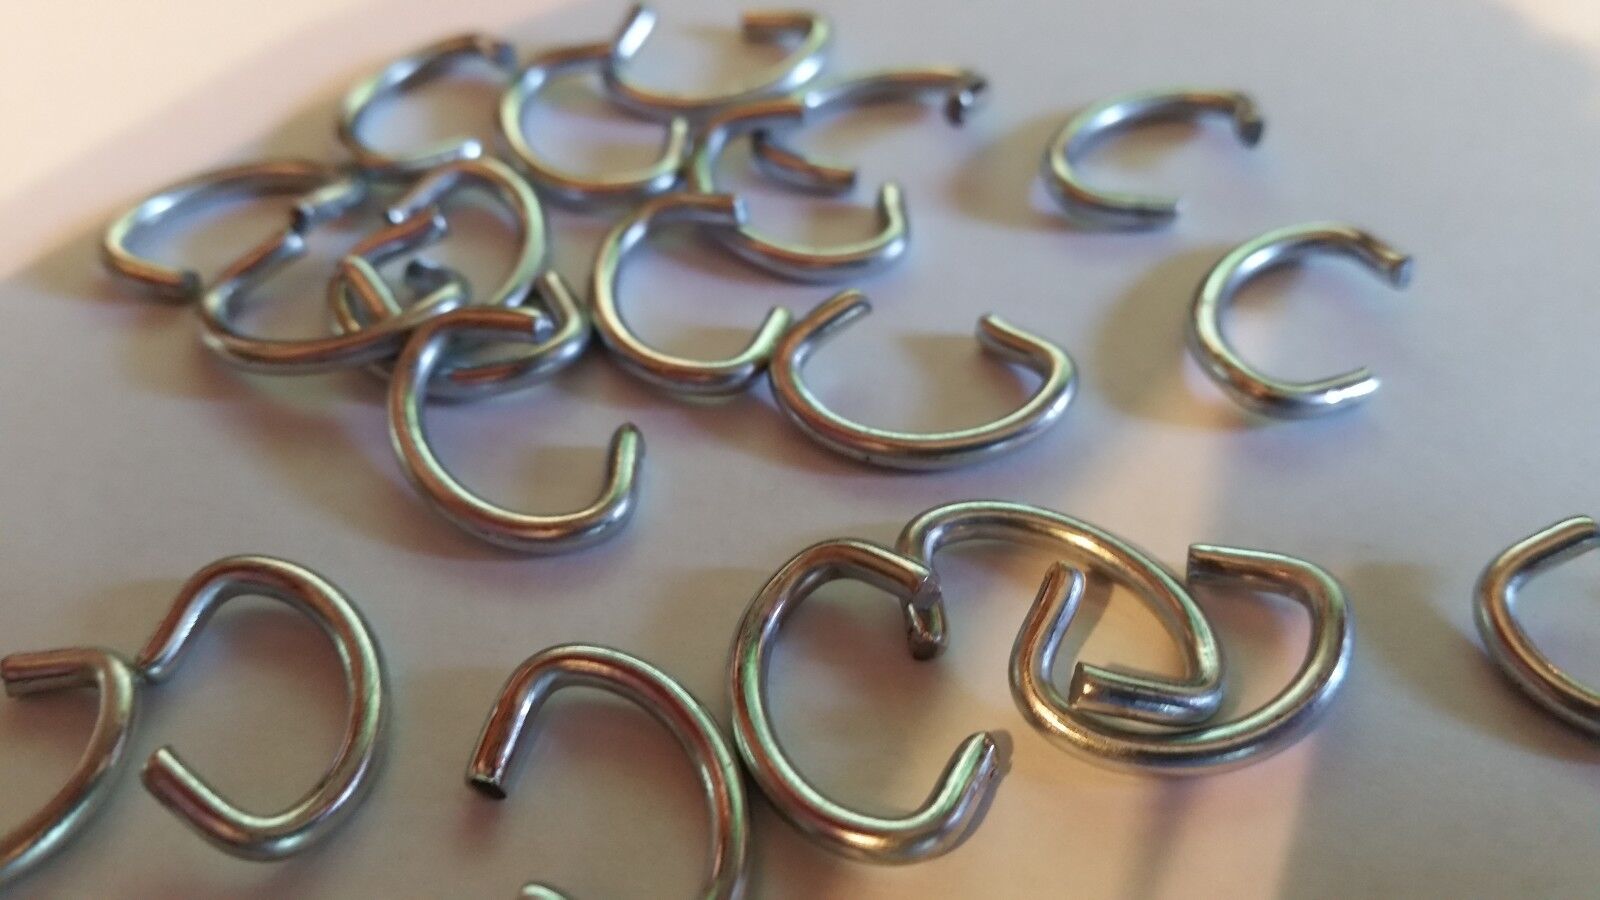 100 - 1/2" Blunt Point Hog Rings, Stainless Steel.  Fast, Free Shipping Unbranded